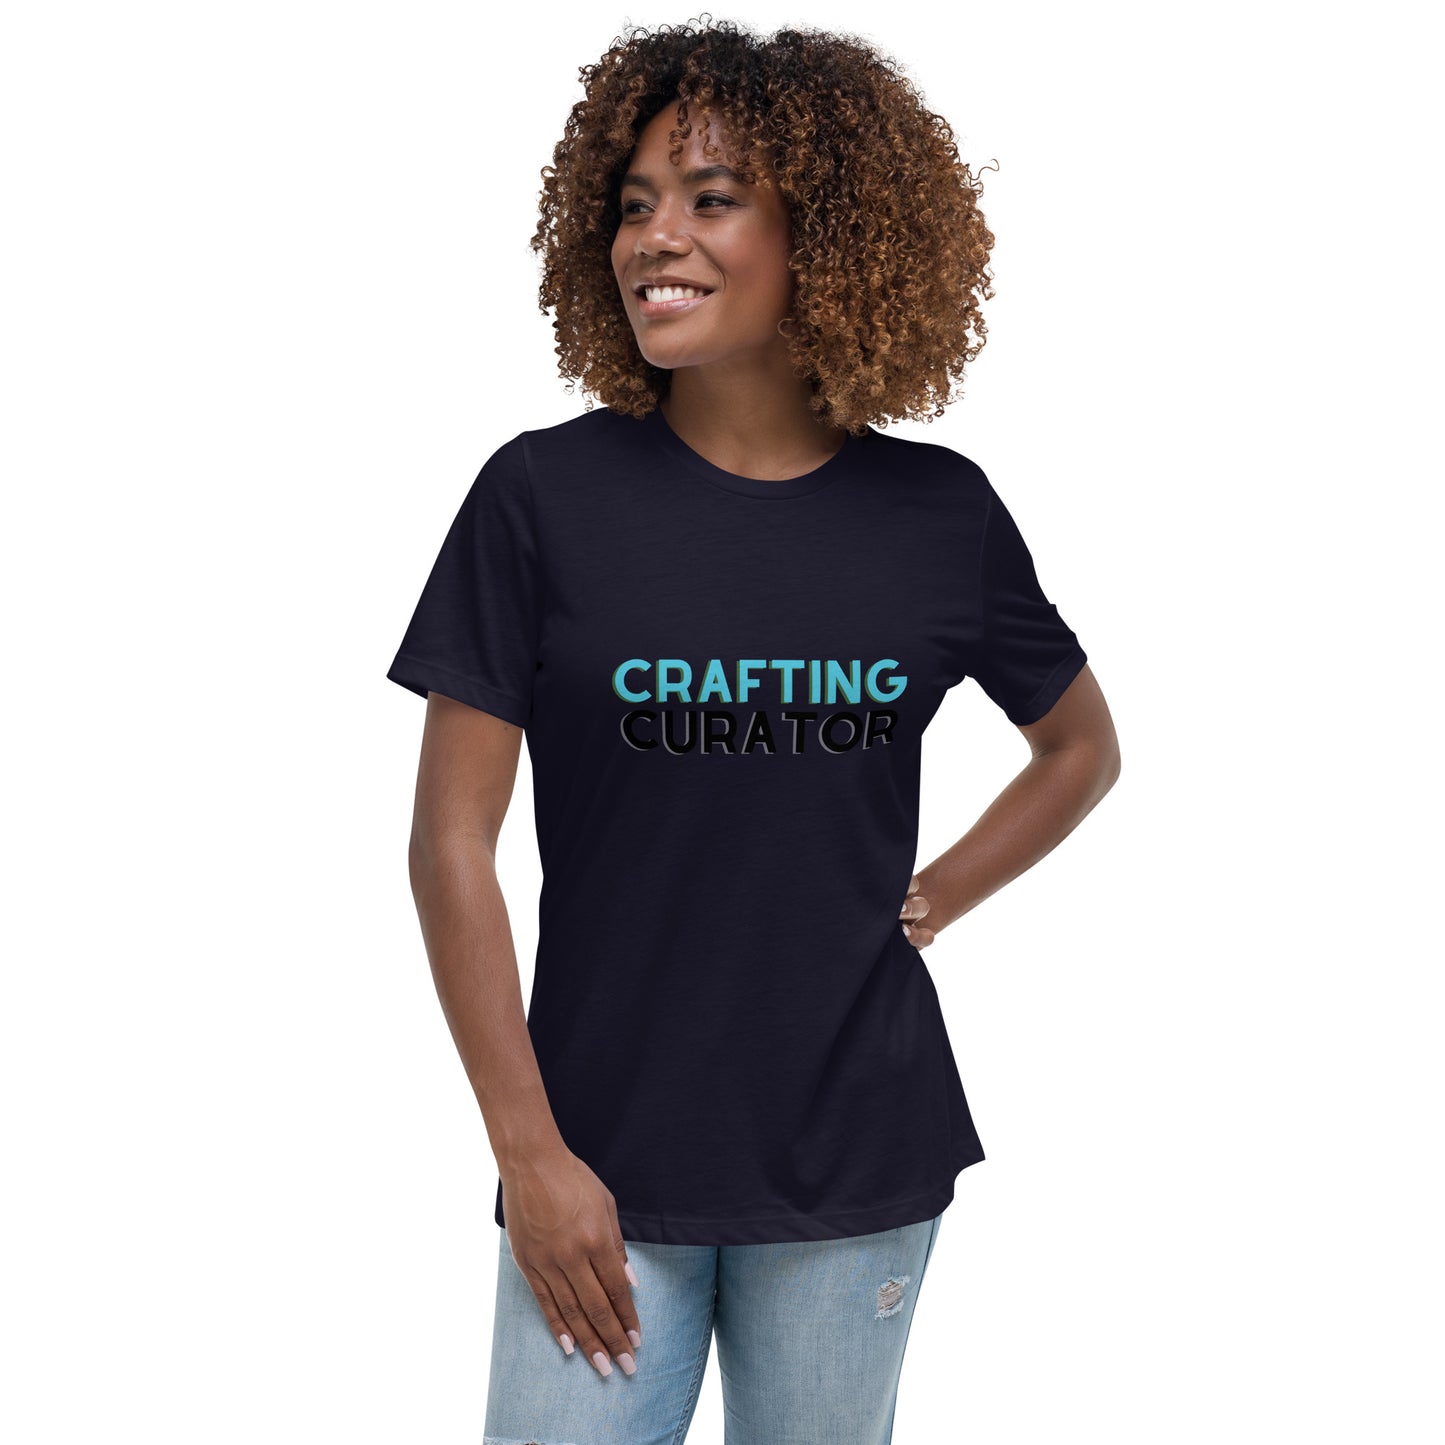 Crafting Curator Women's Relaxed T-Shirt